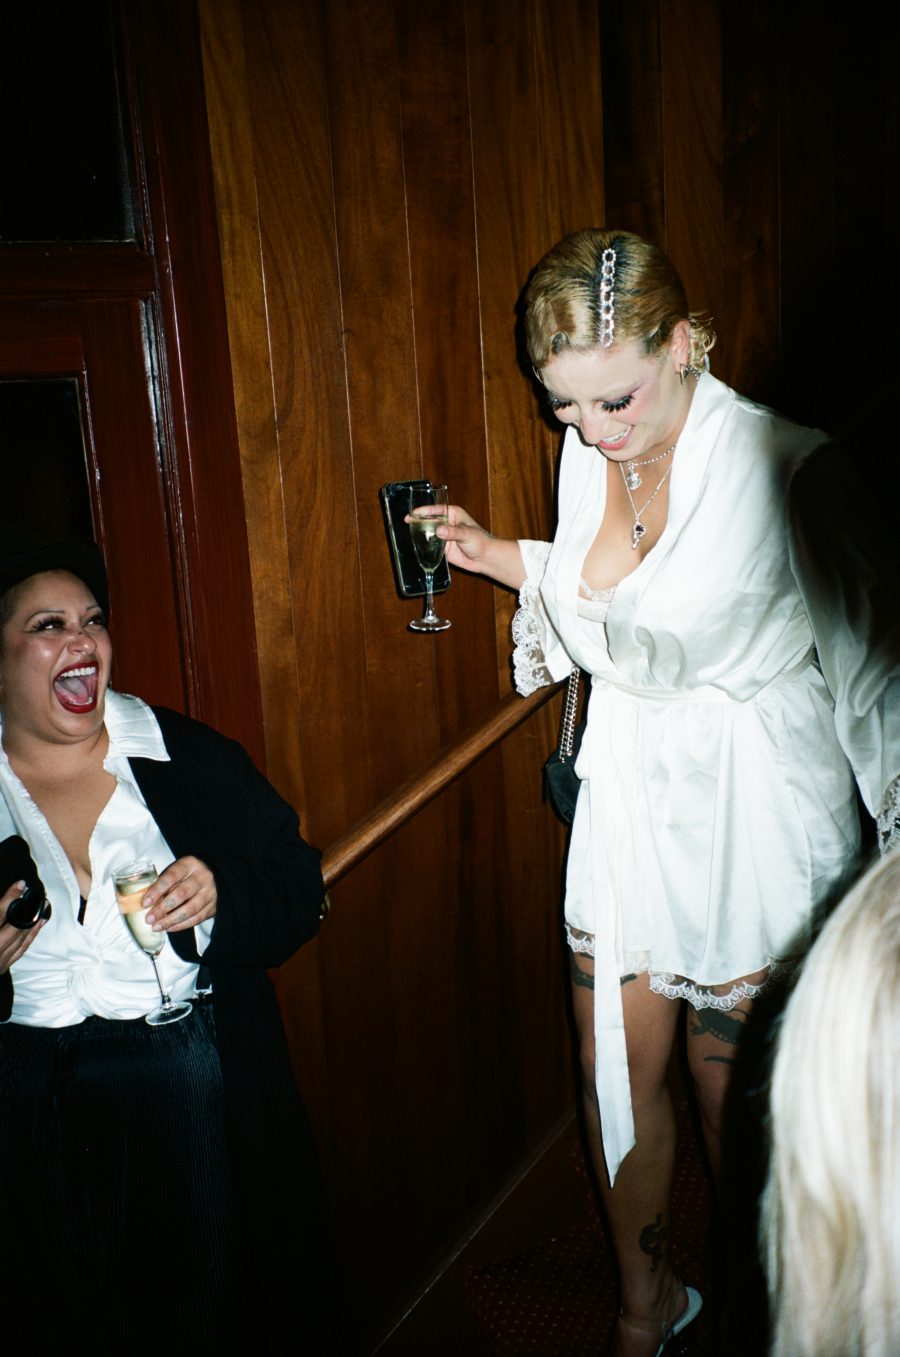 Two people laughing and having fun at a queer wedding.